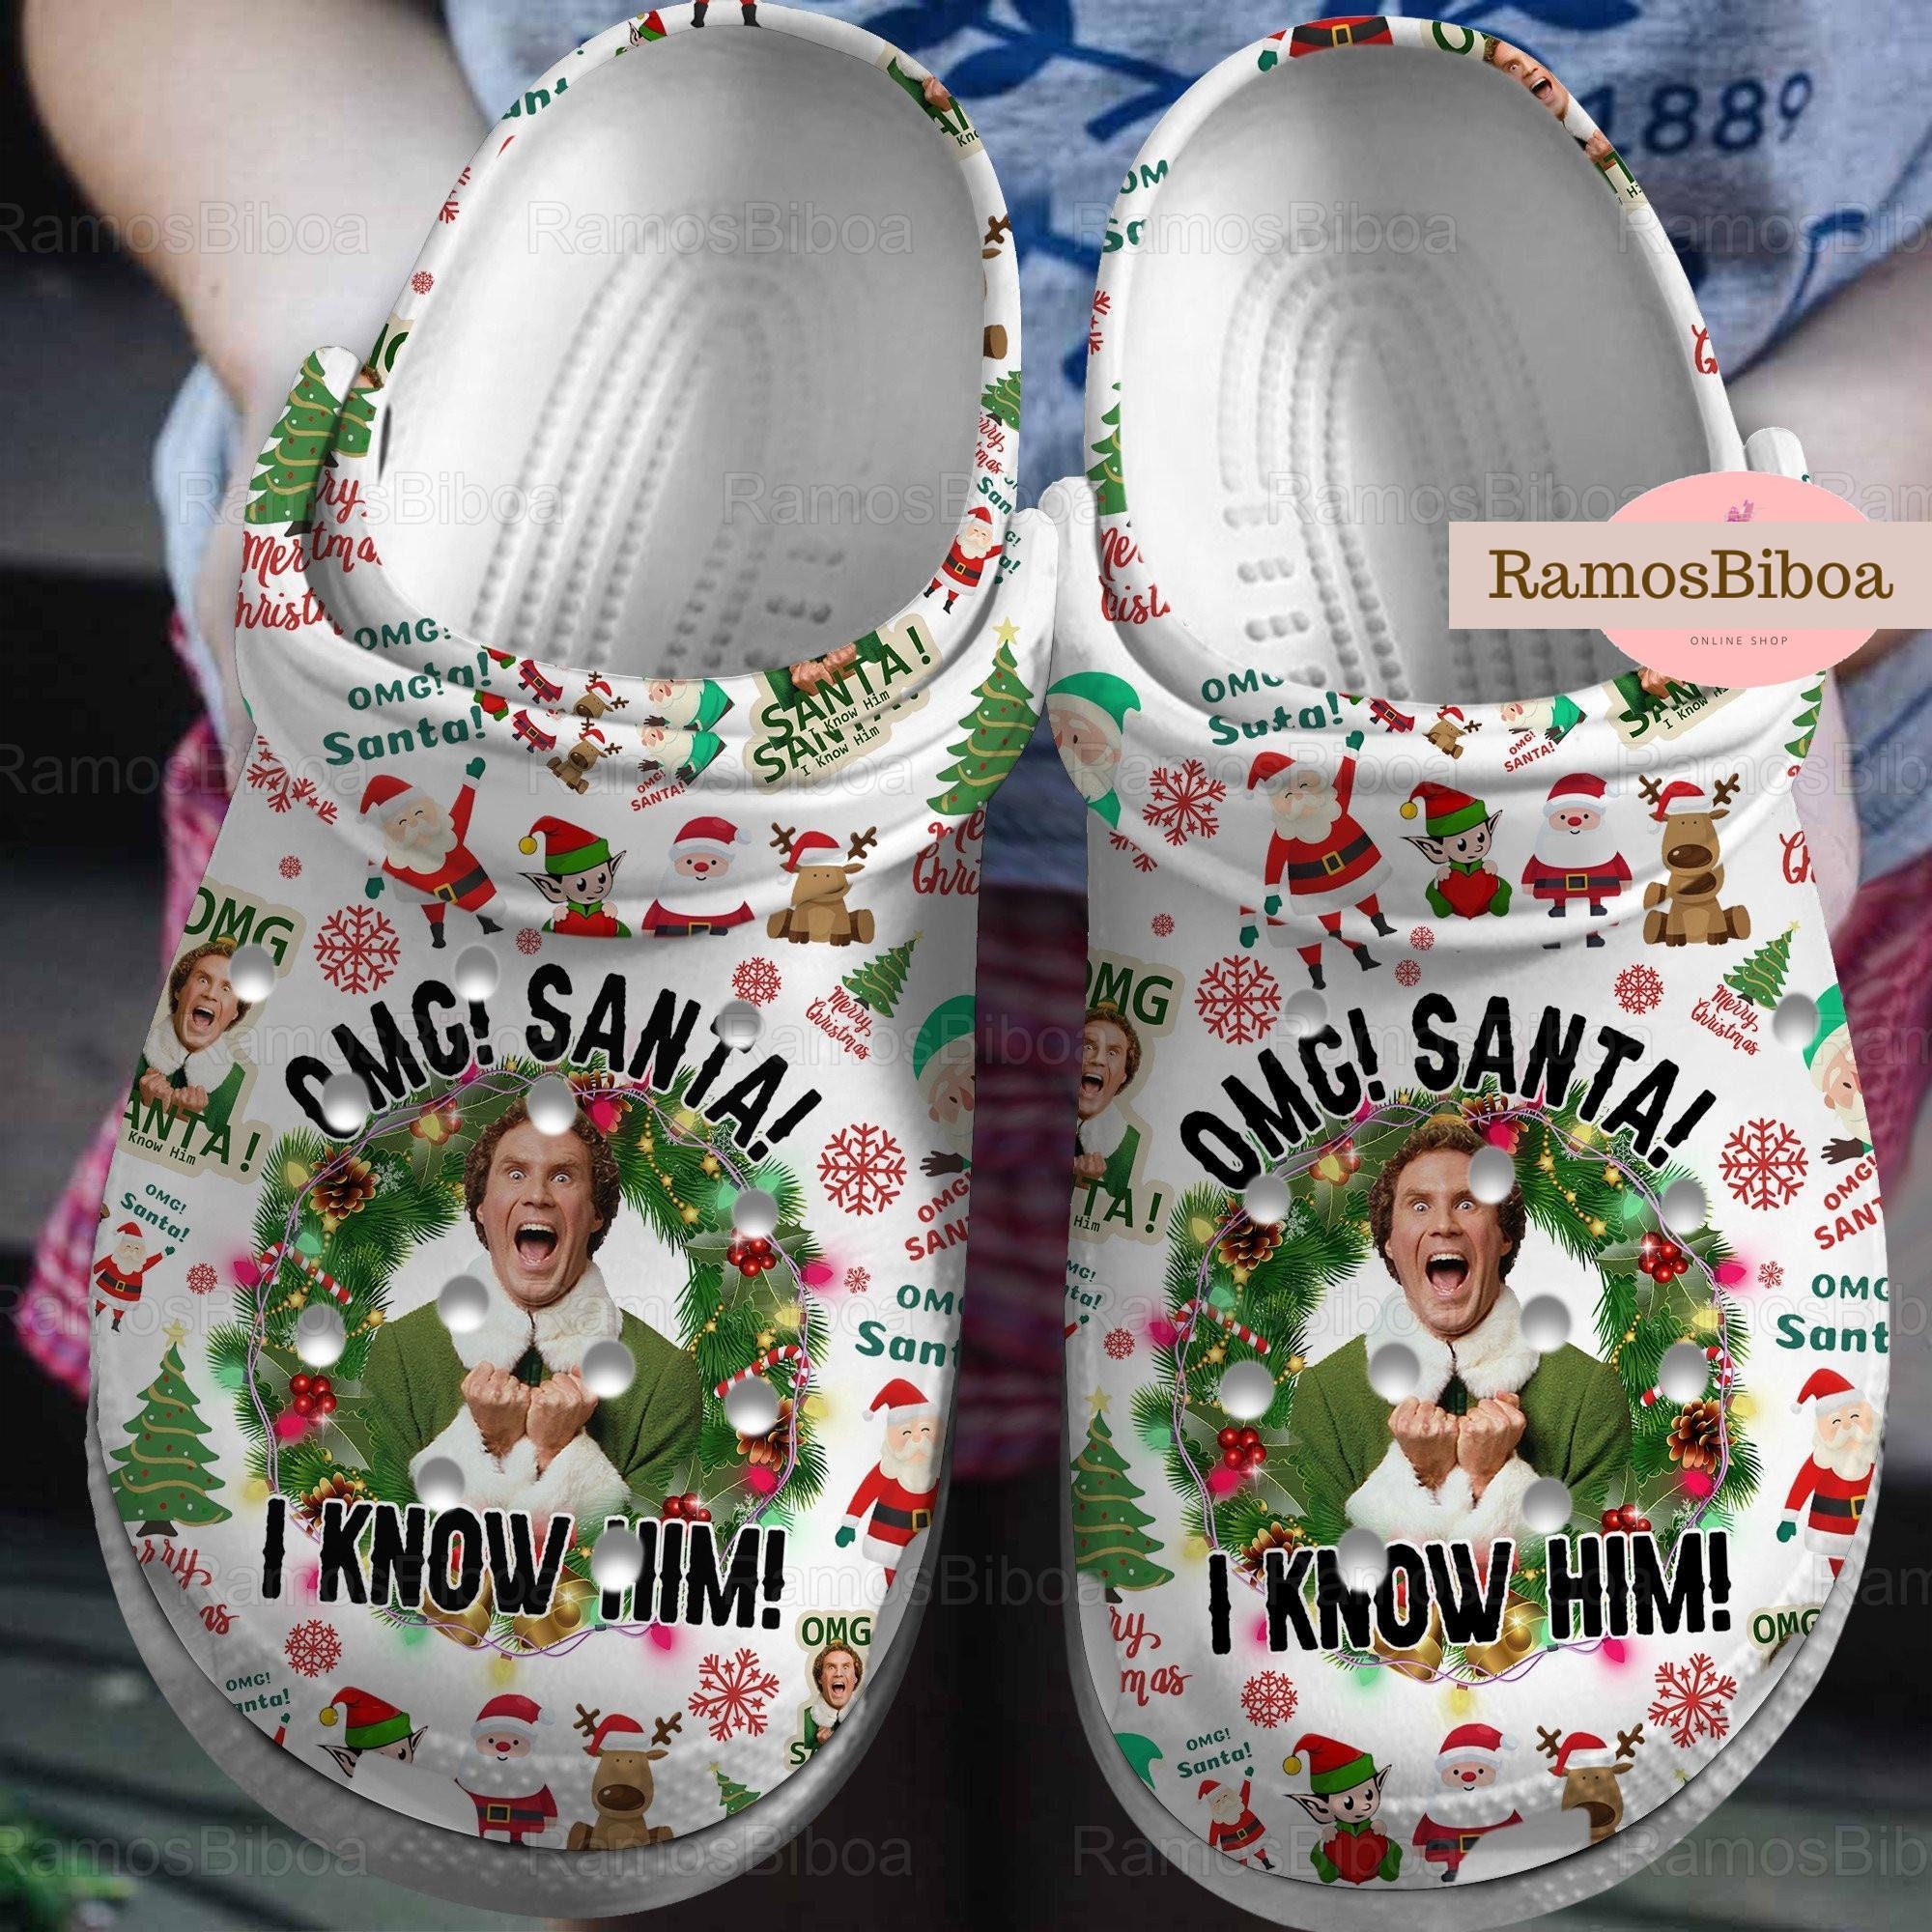 Top-selling Item] The Nightmare Before Christmas Movie Rubber Crocs Unisex  Crocband Clogs